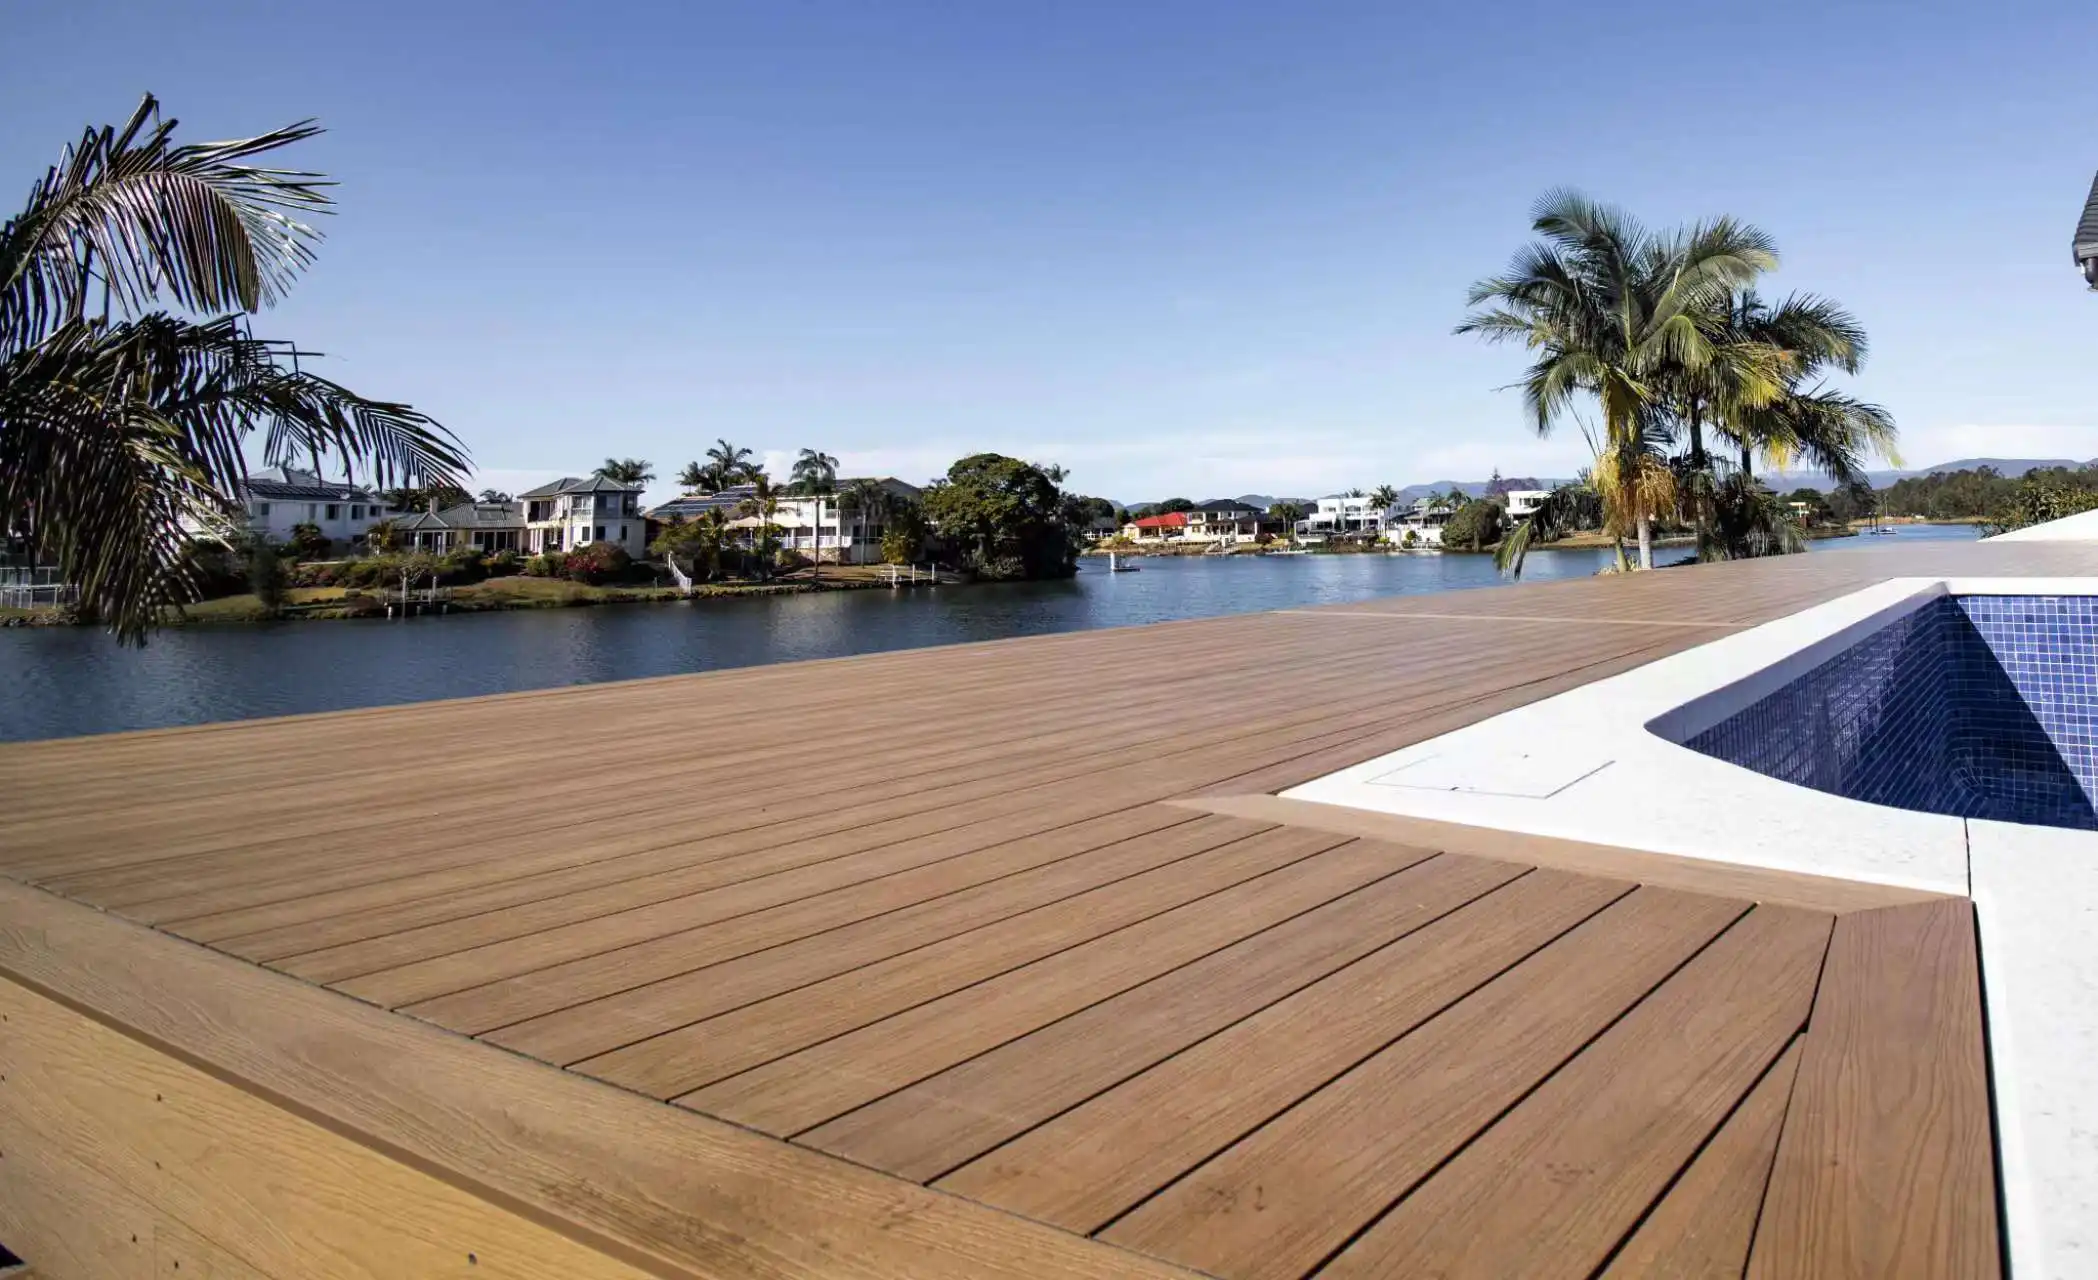 Woodgrain terrace   composite co-extrusion capped wpc teak decking board panel engineered flooring for outdoor